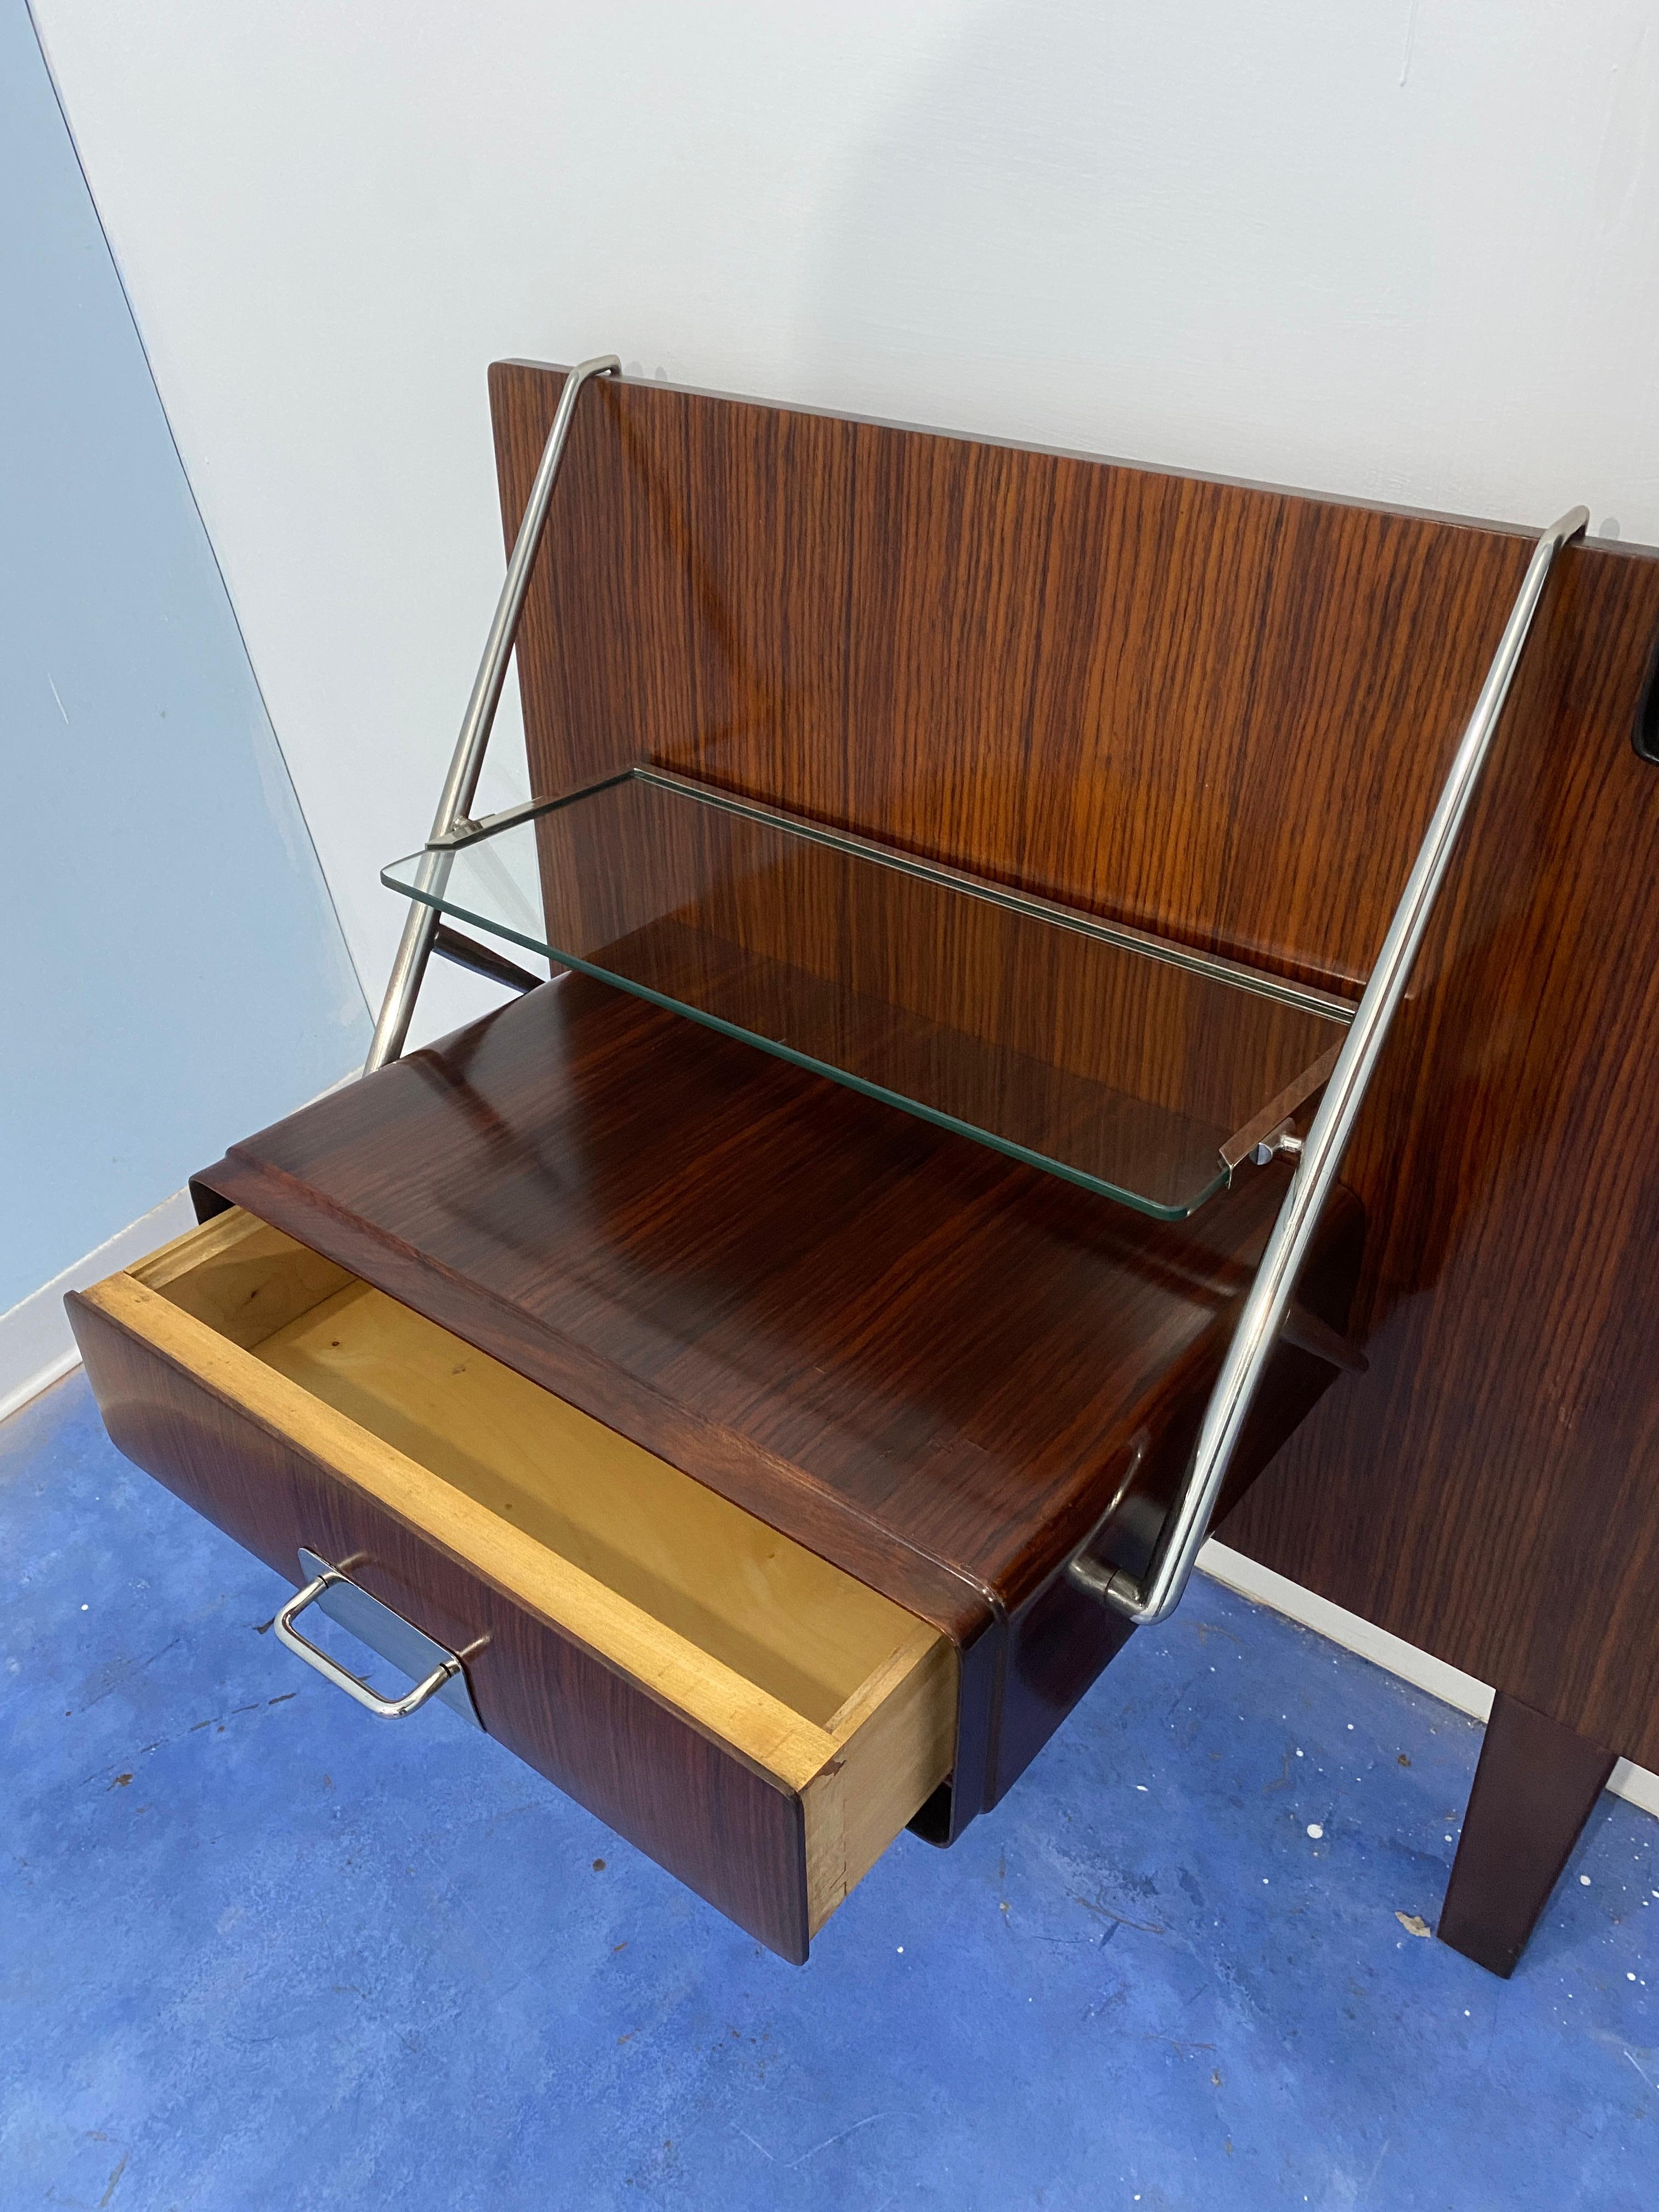 Italian nightstands from the 1950s with headboard bed designed by Silvio Cavatorta 4